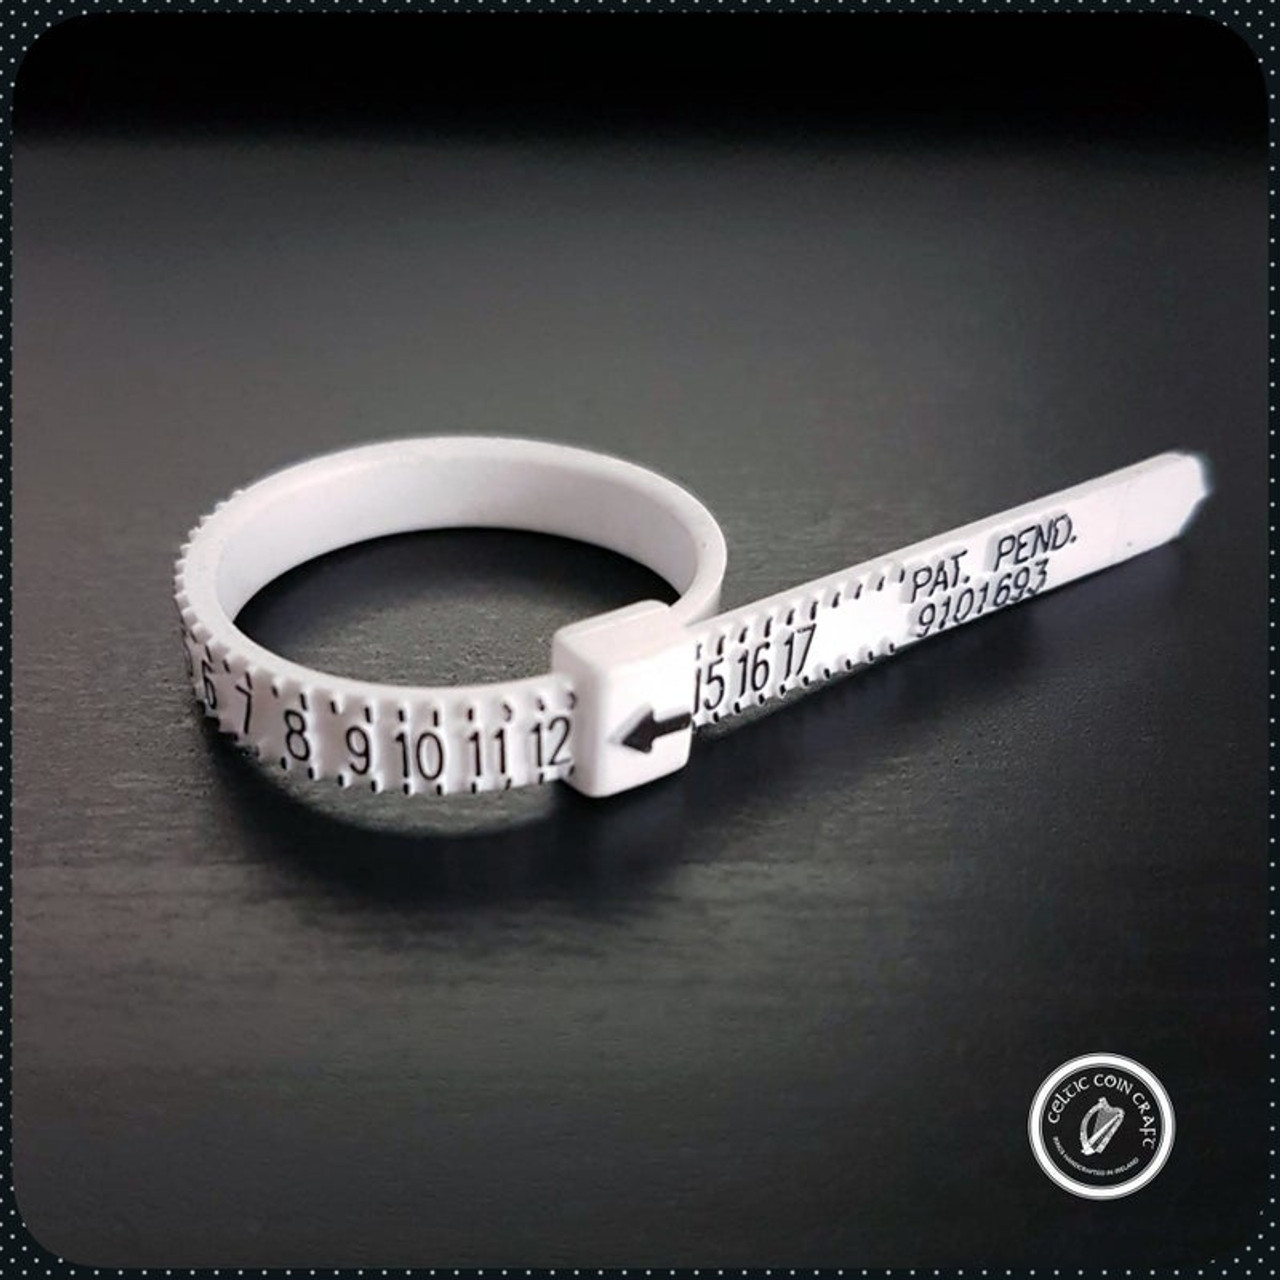 Ring Sizer - Includes discount code for €5 off any ring